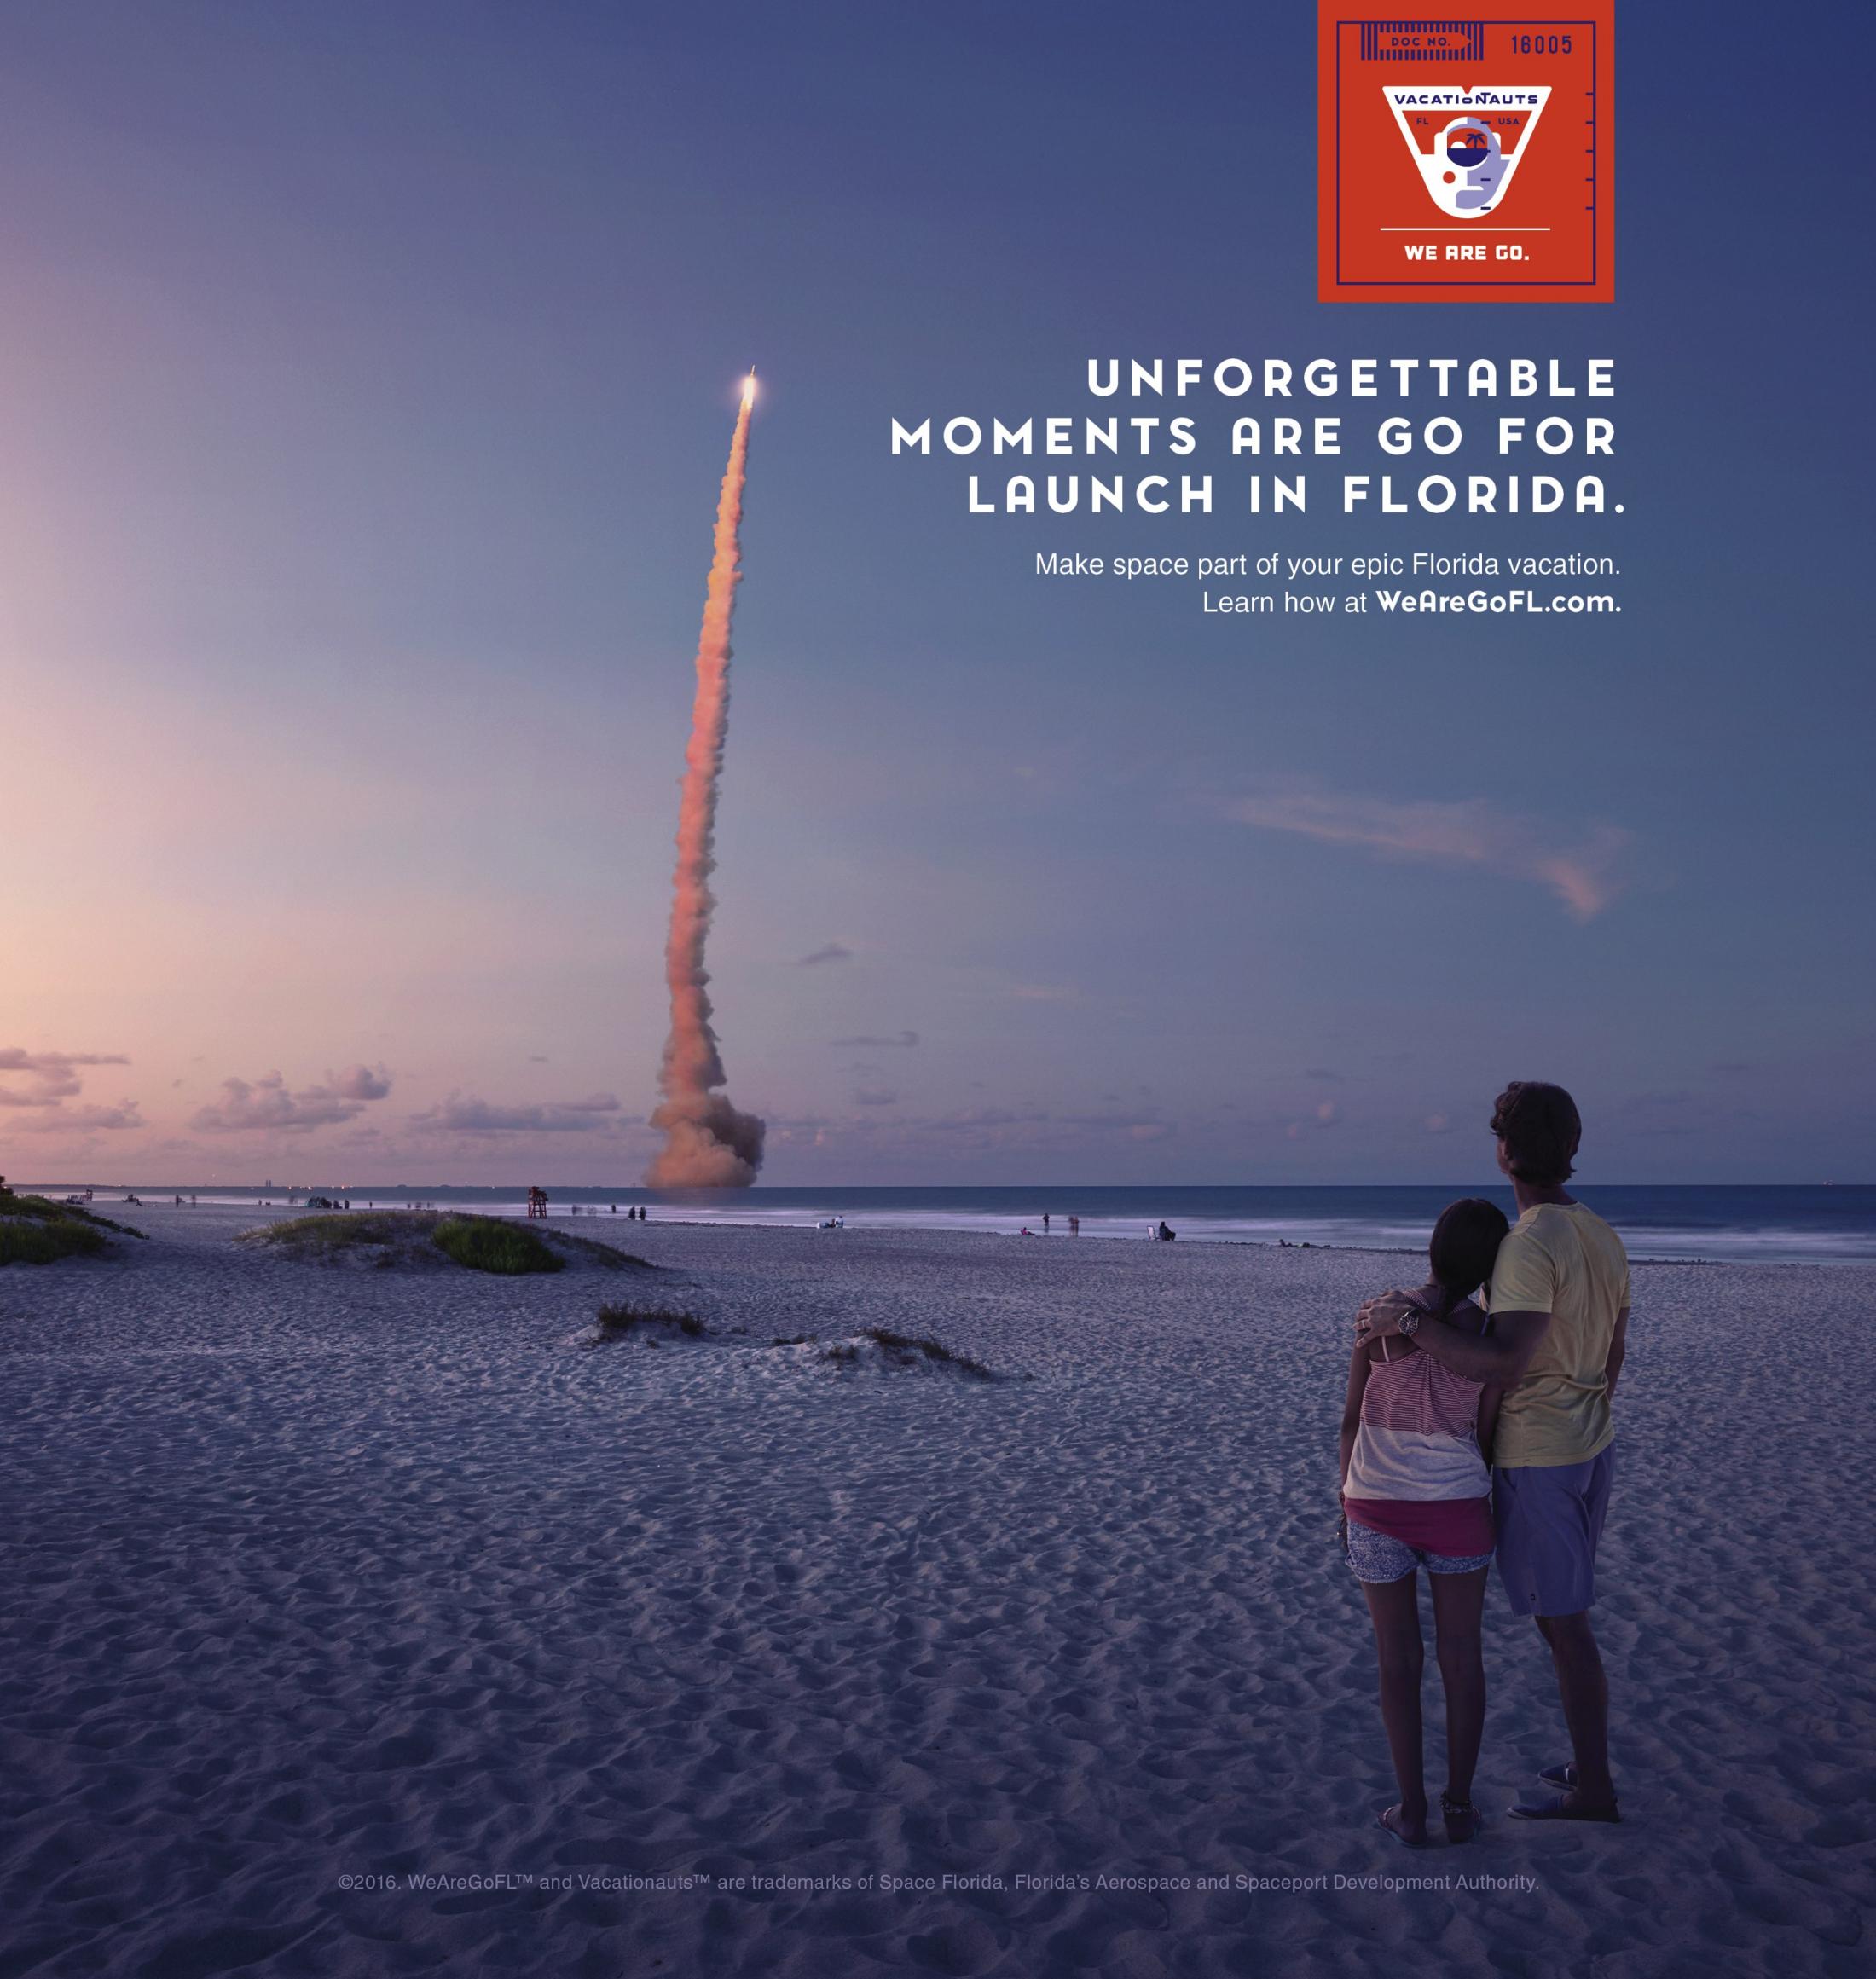 Unforgettable Moments Are Go for Launch in Florida